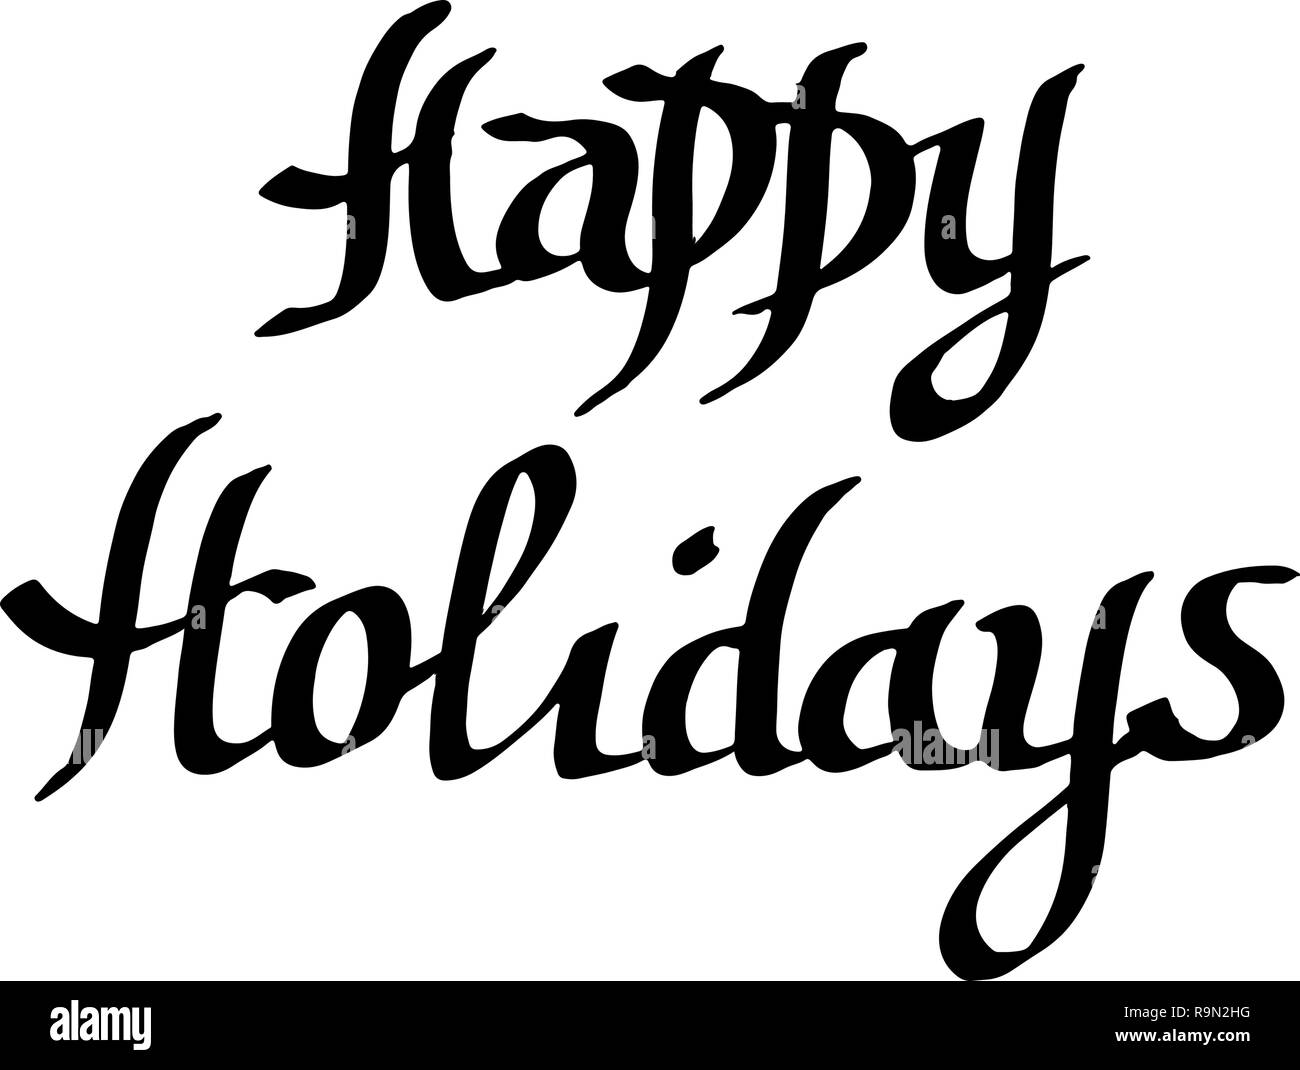 Vector Happy Holidays handwriting calligraphy. Black and white engraved ink art. Isolated text illustration element. Stock Vector